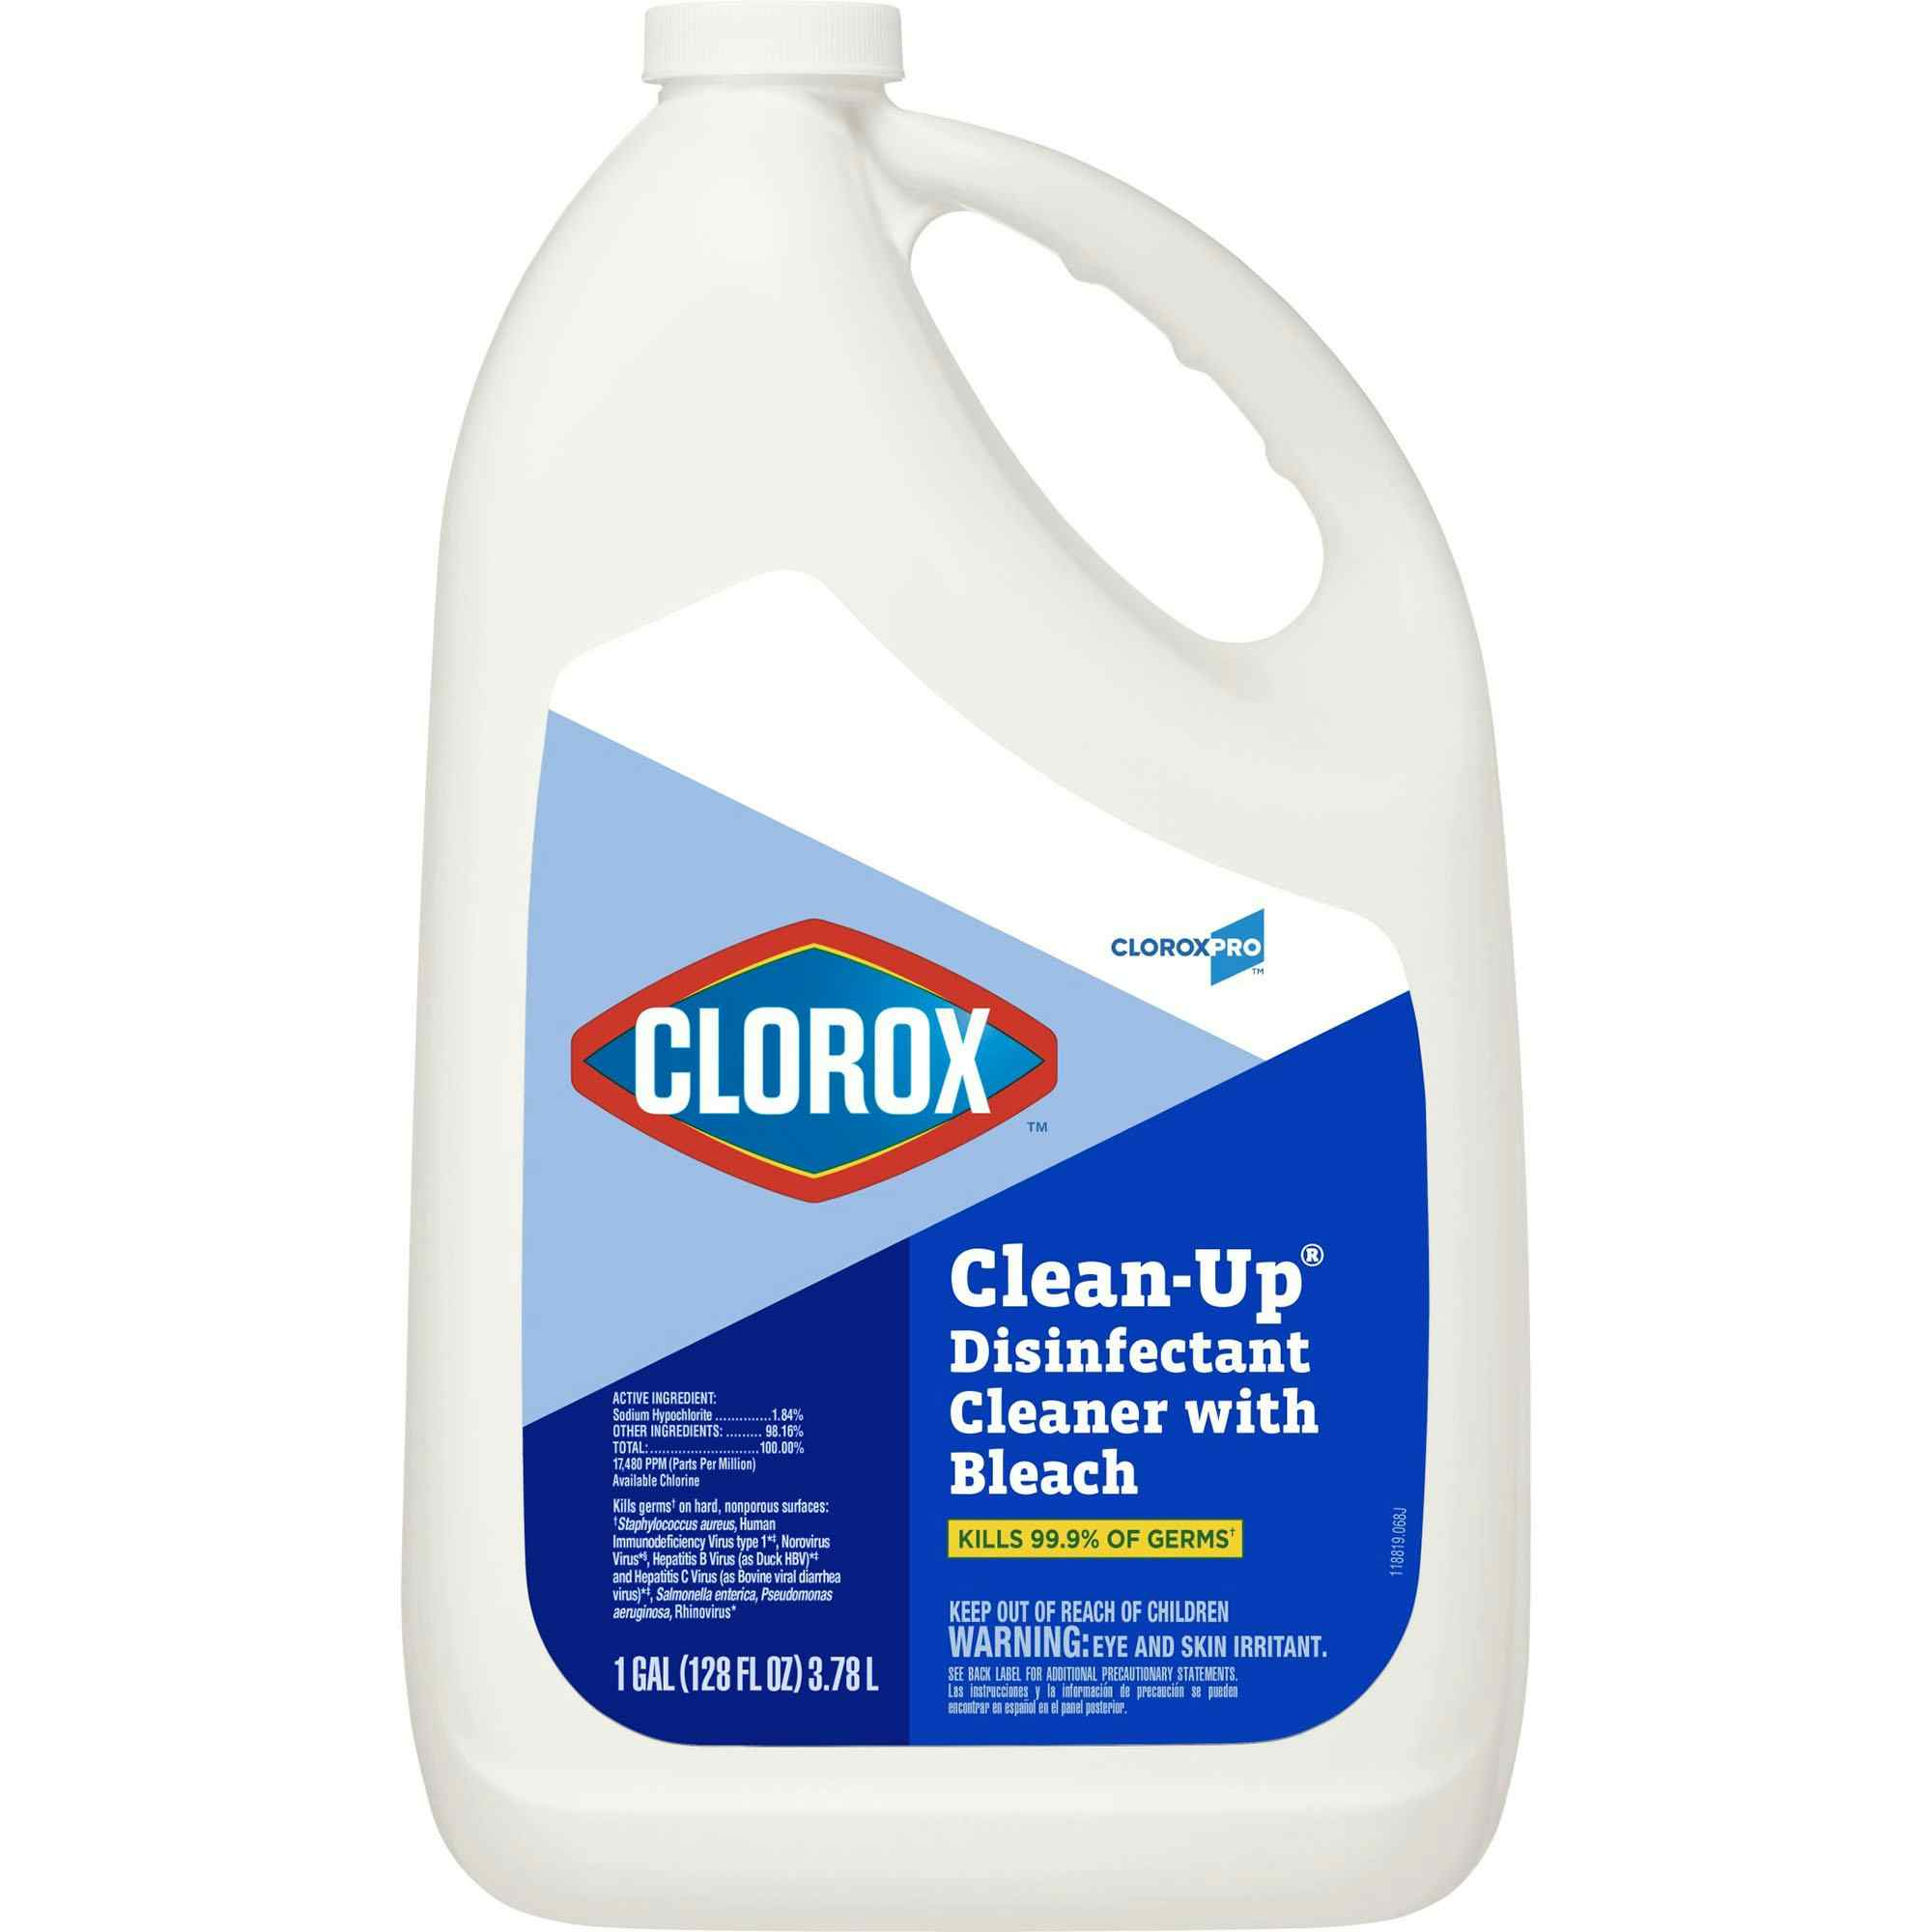 Clorox Clean-Up Disinfectant Cleaner with Bleach, 1 gal., 35420CT, Case of 4